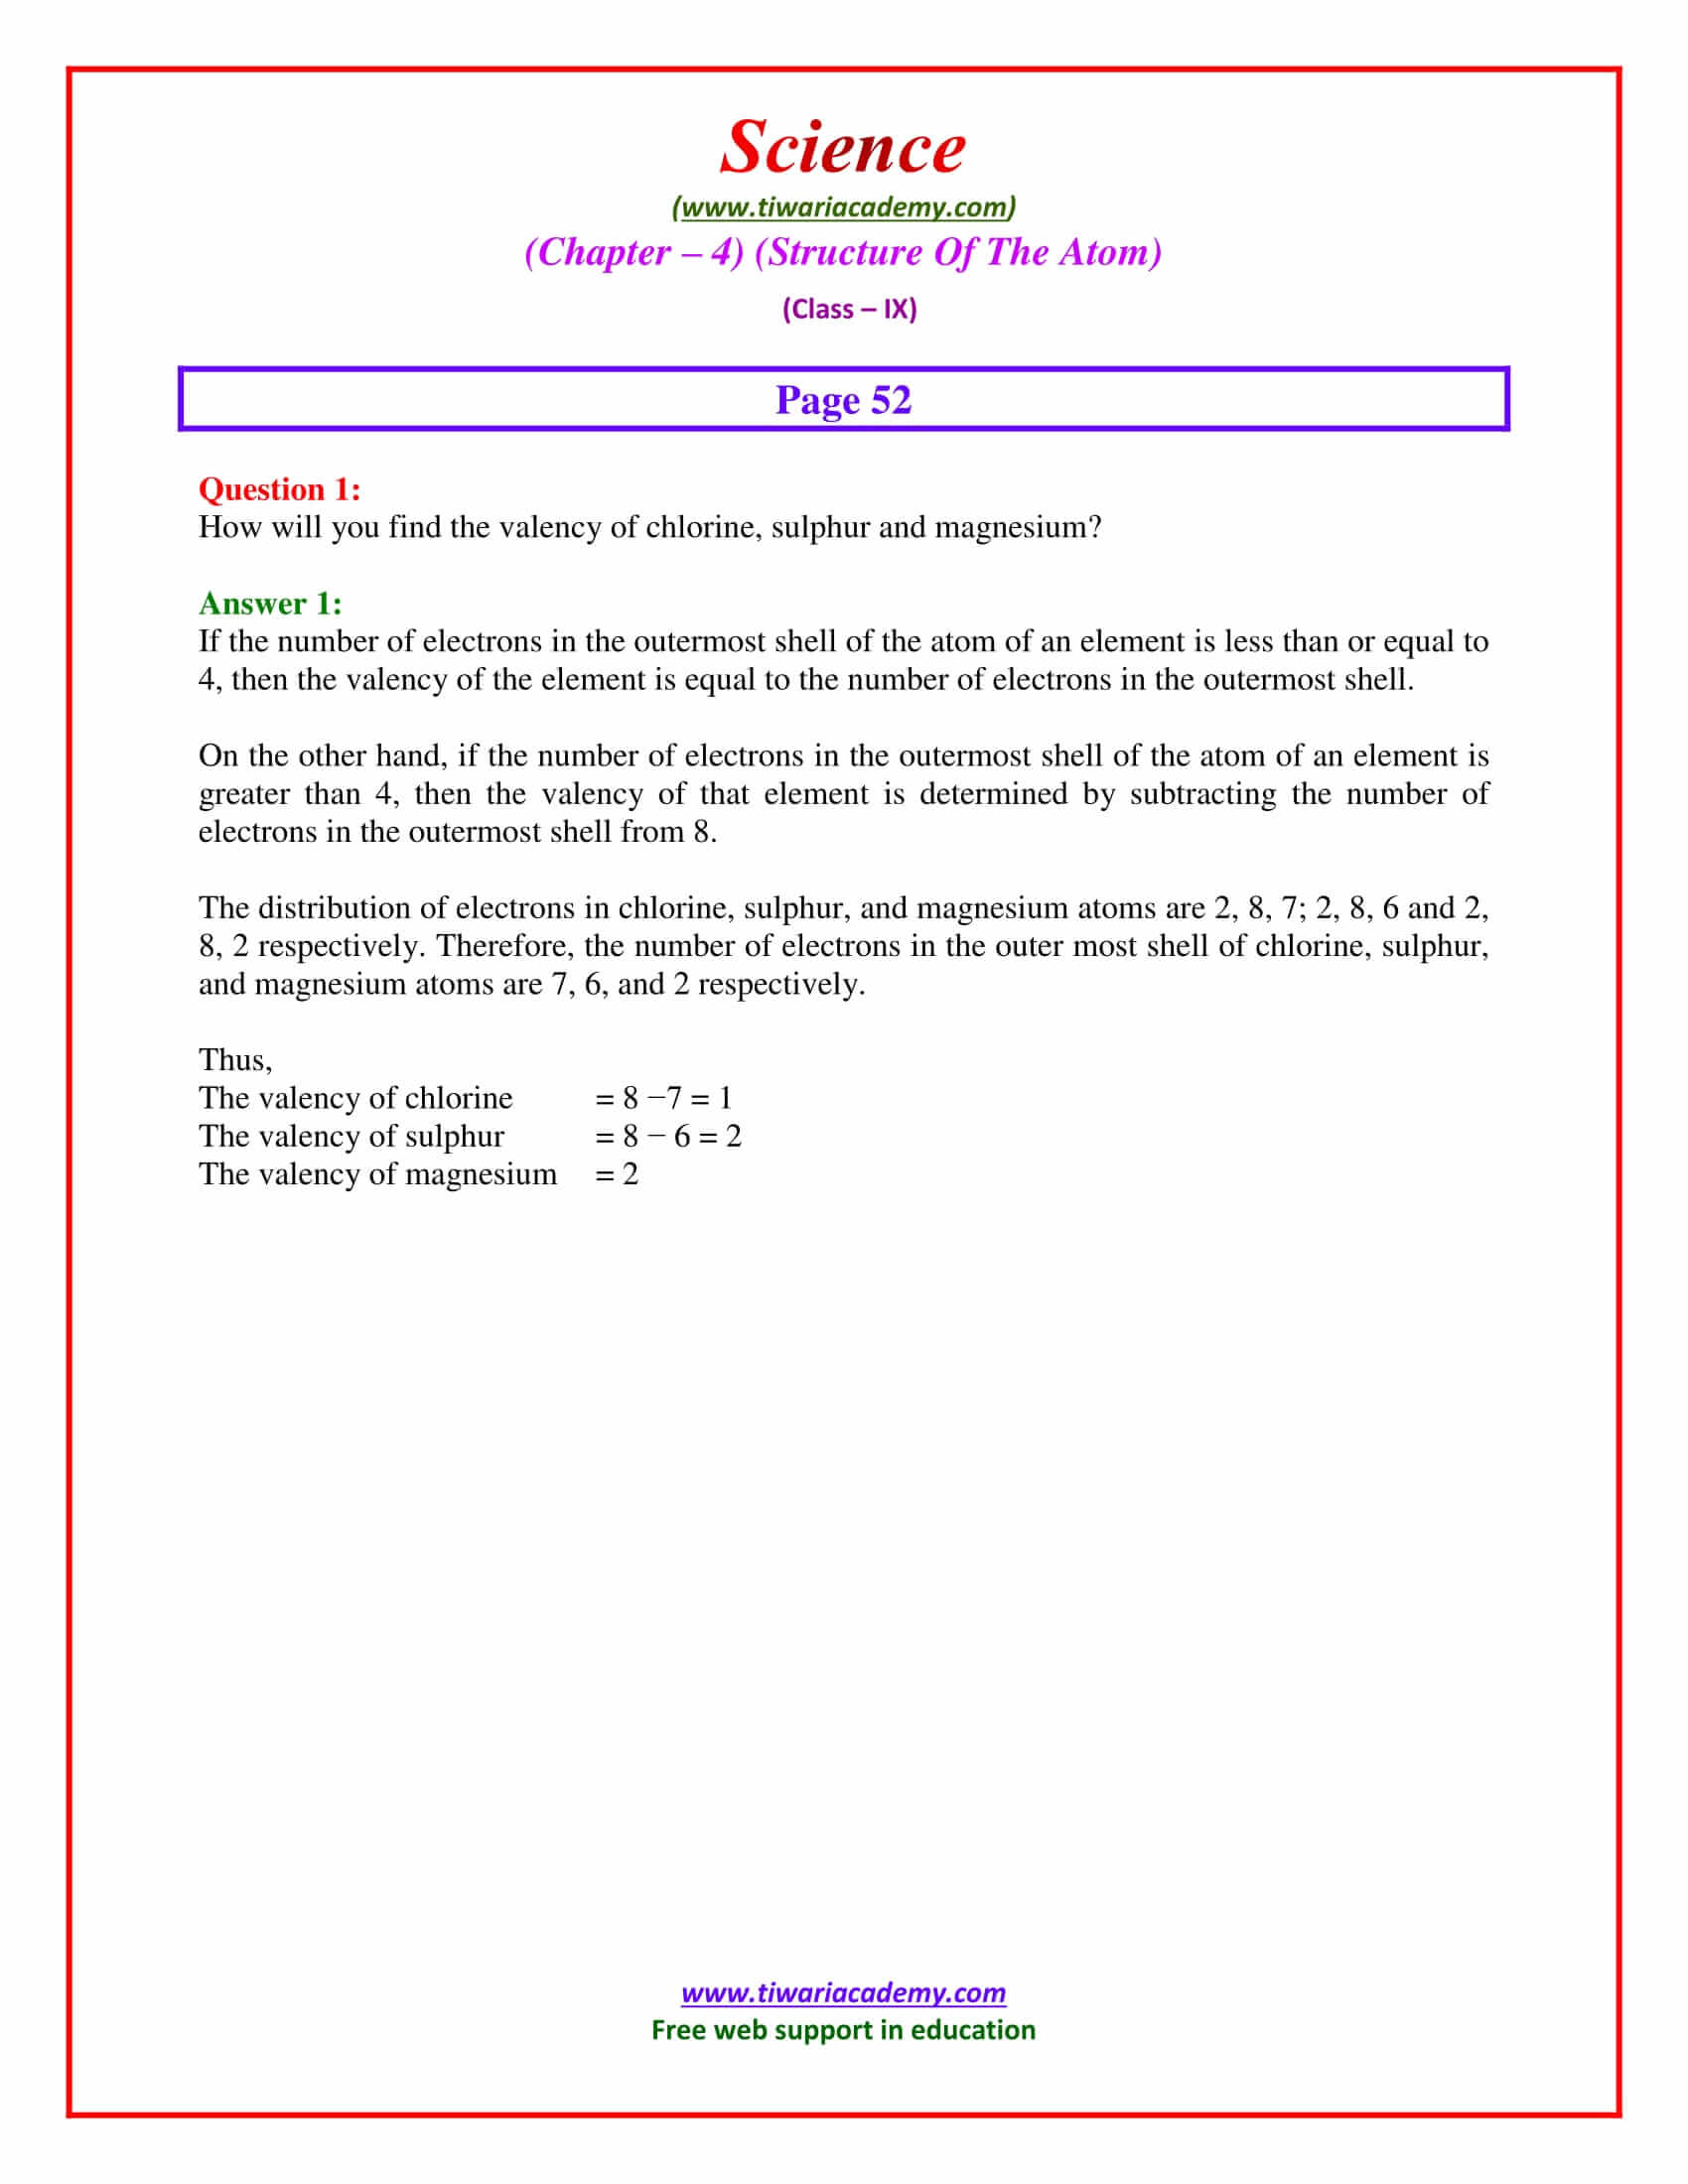 NCERT Solutions for Class 9 Science Chapter 4 intext questions page 52